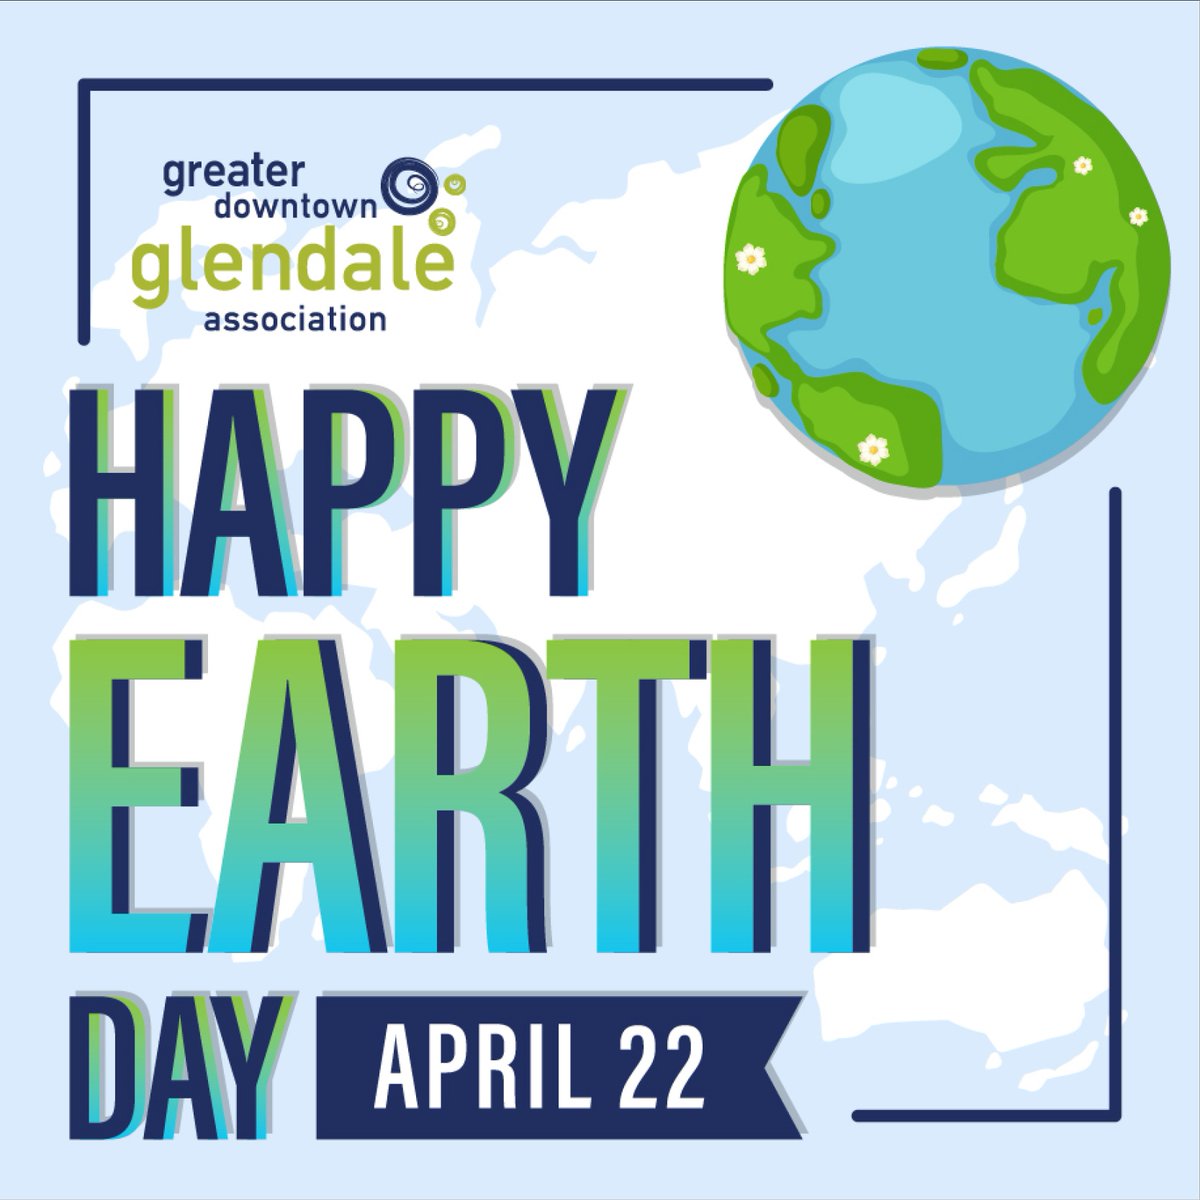 Happy Earth Day! 🌎 Let's all do our part to keep Glendale beautiful 🌸🌳 #earthday #environment #glendale #dtglendale 💚